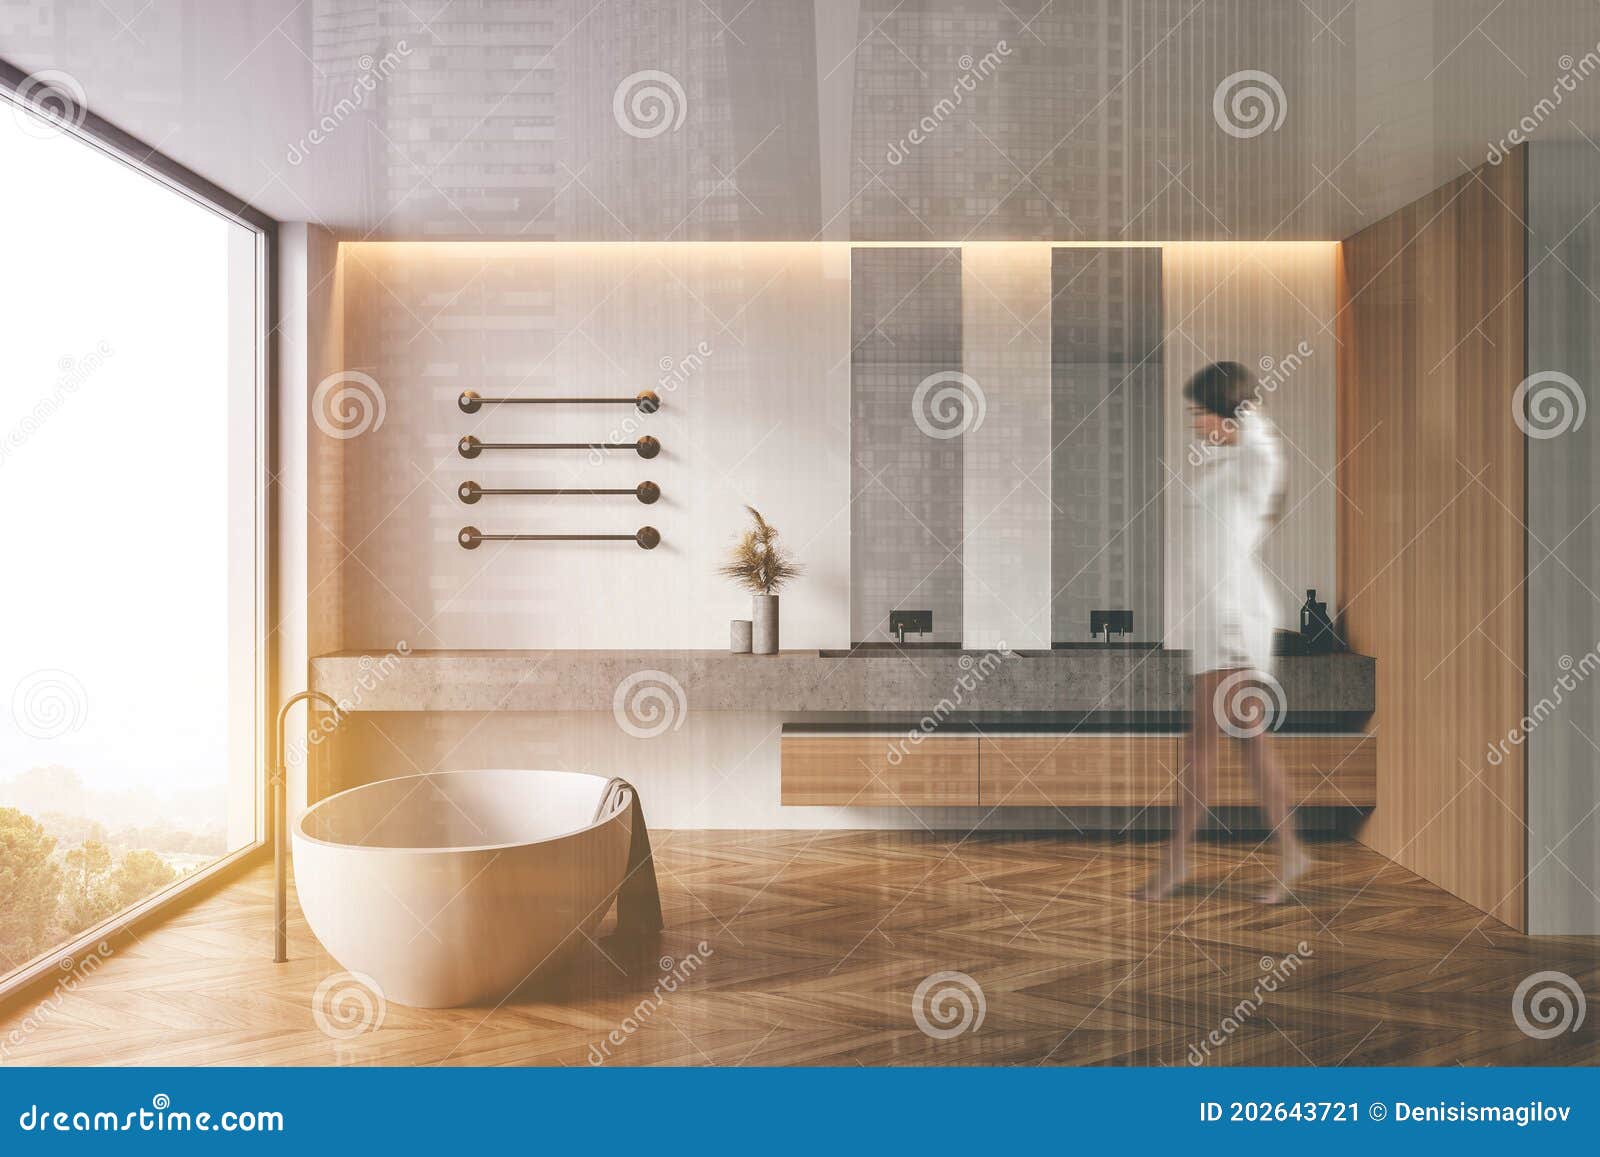 Woman Walking in White and Wooden Bathroom Stock Image - Image of ...